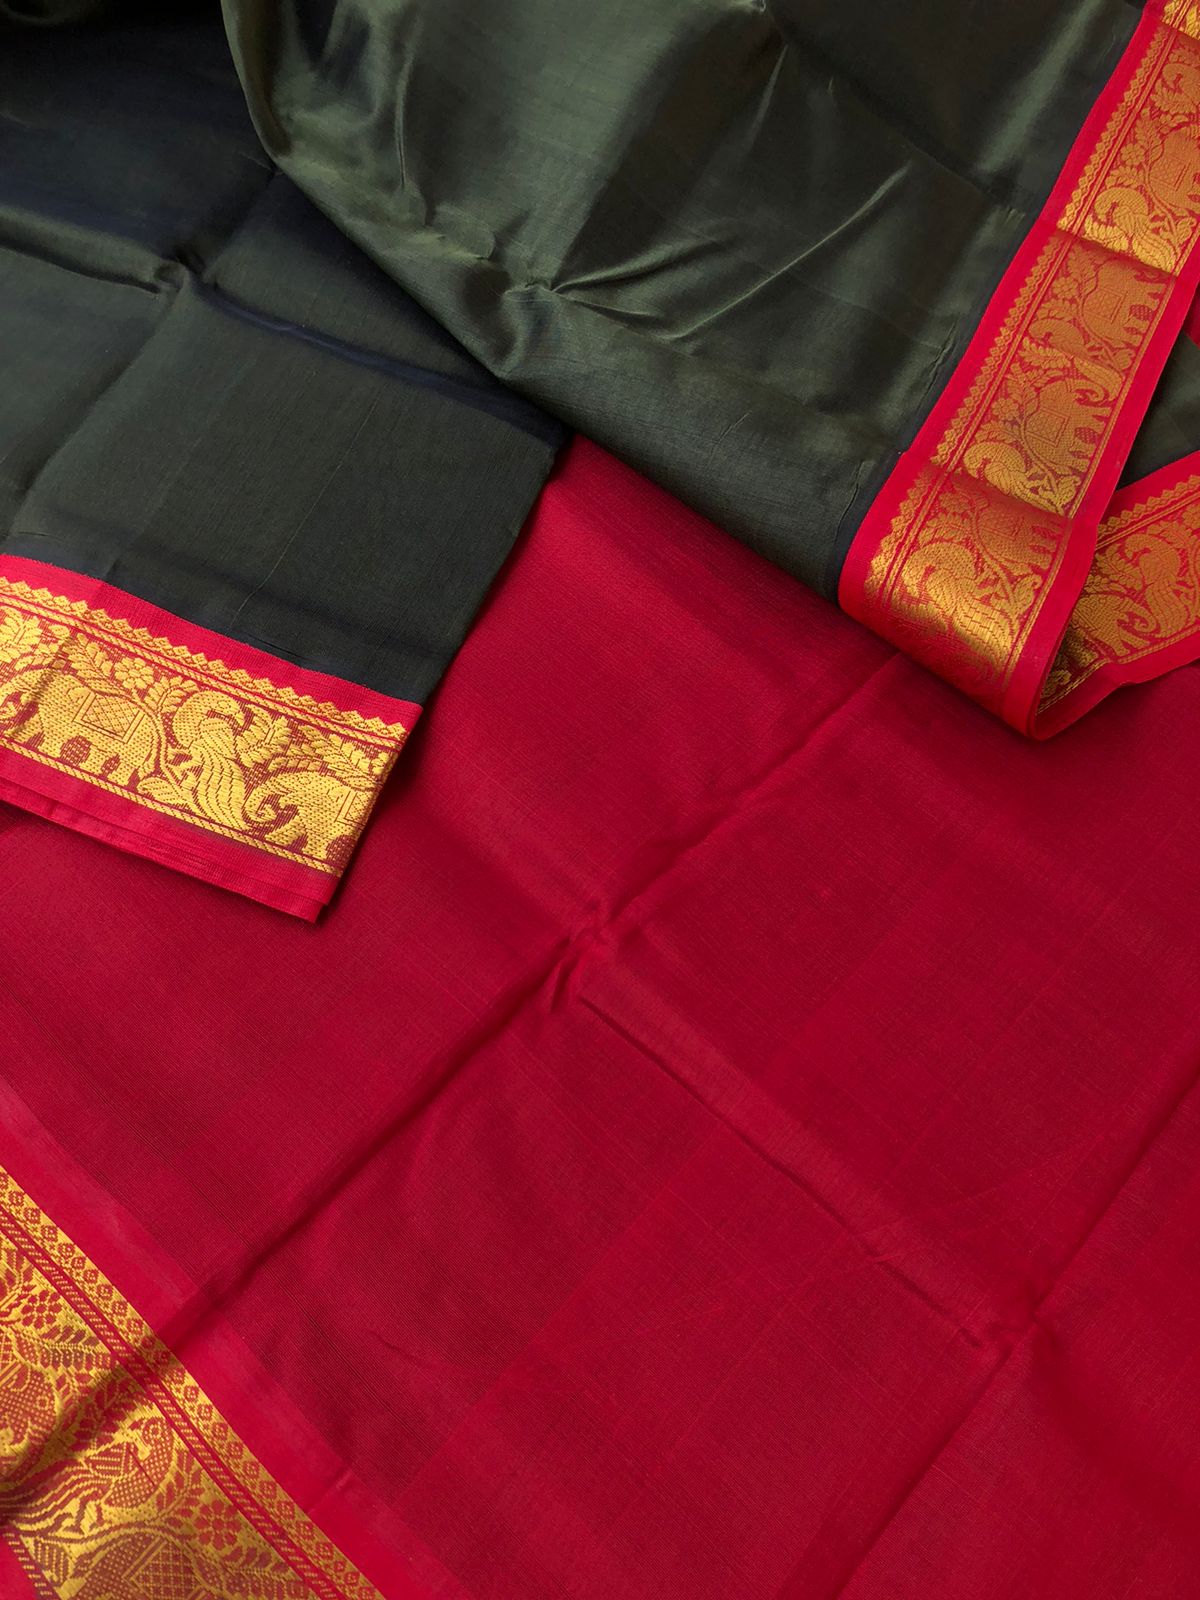 Korvai Silk Cotton - deep dark army green and red